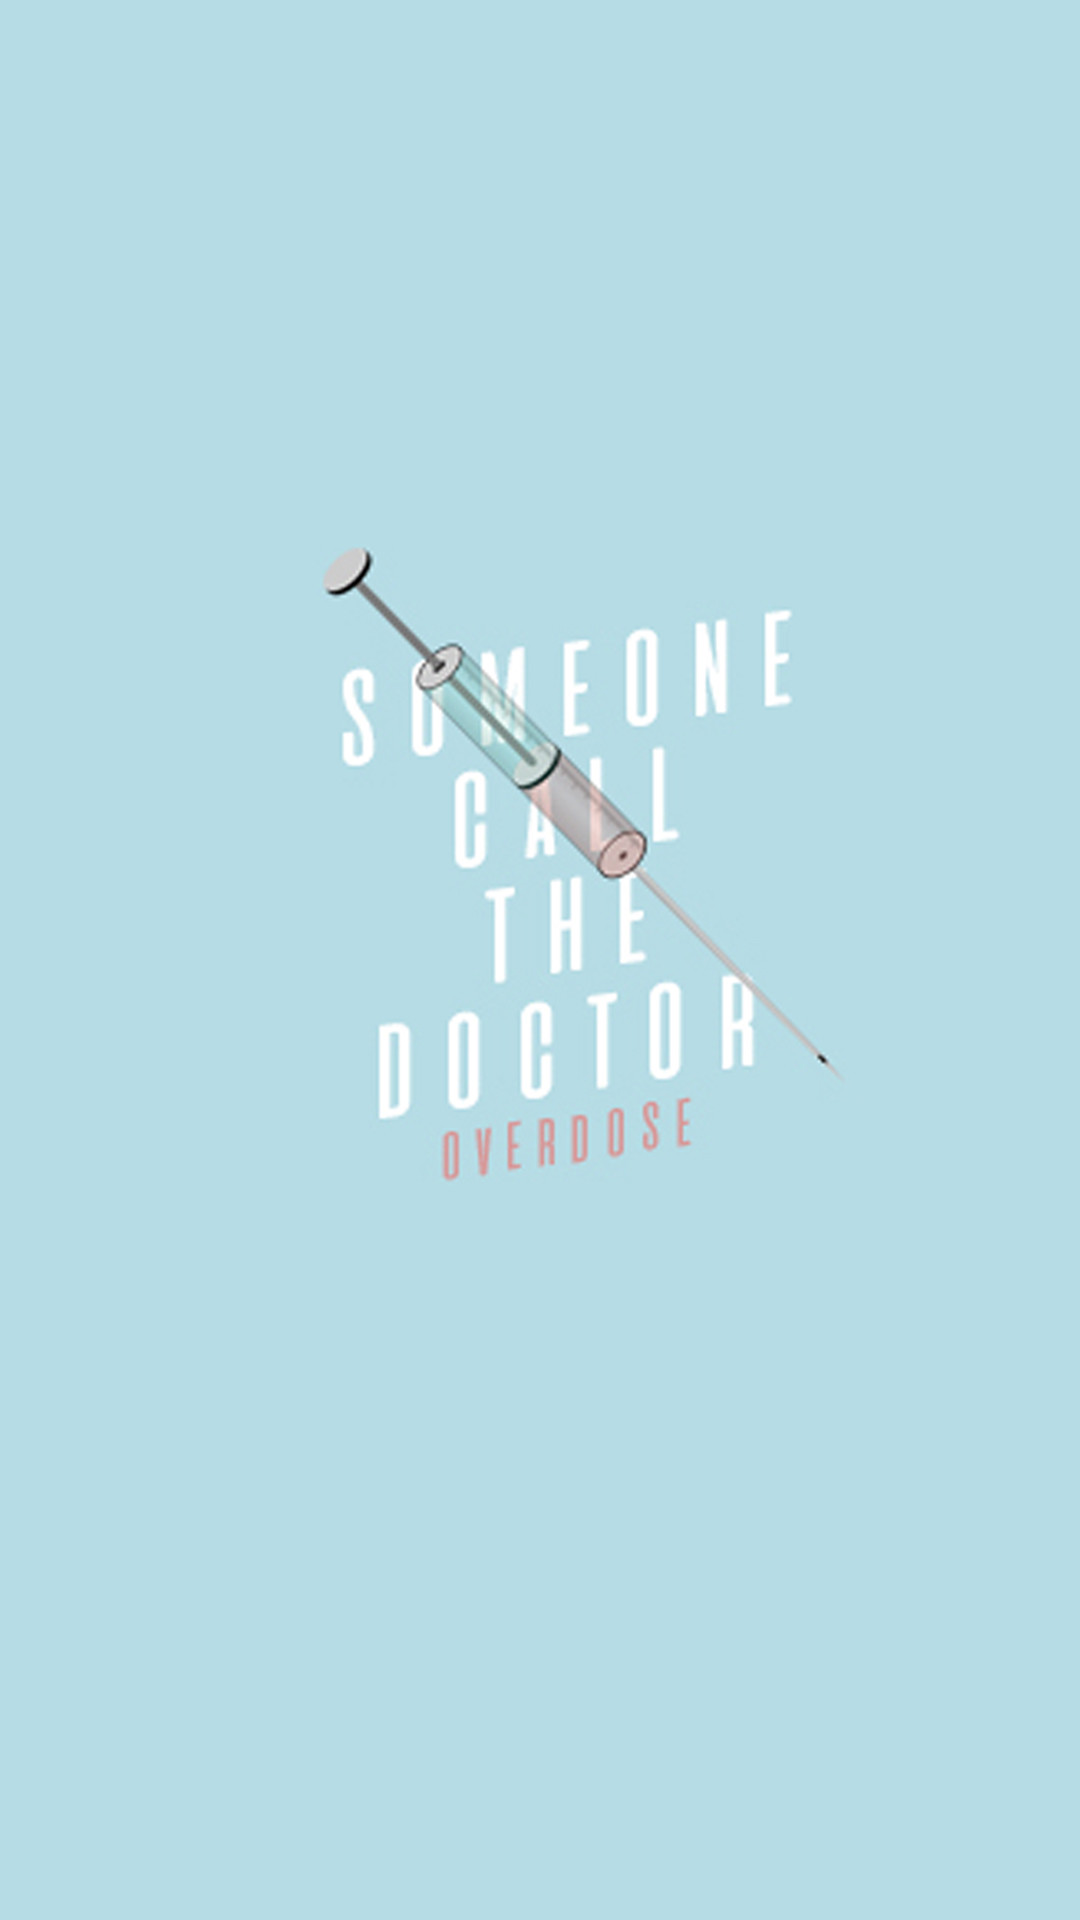 1080x1920 Maybe the doctors are also ocerdosed by EXO #Overdose #Wallpaper